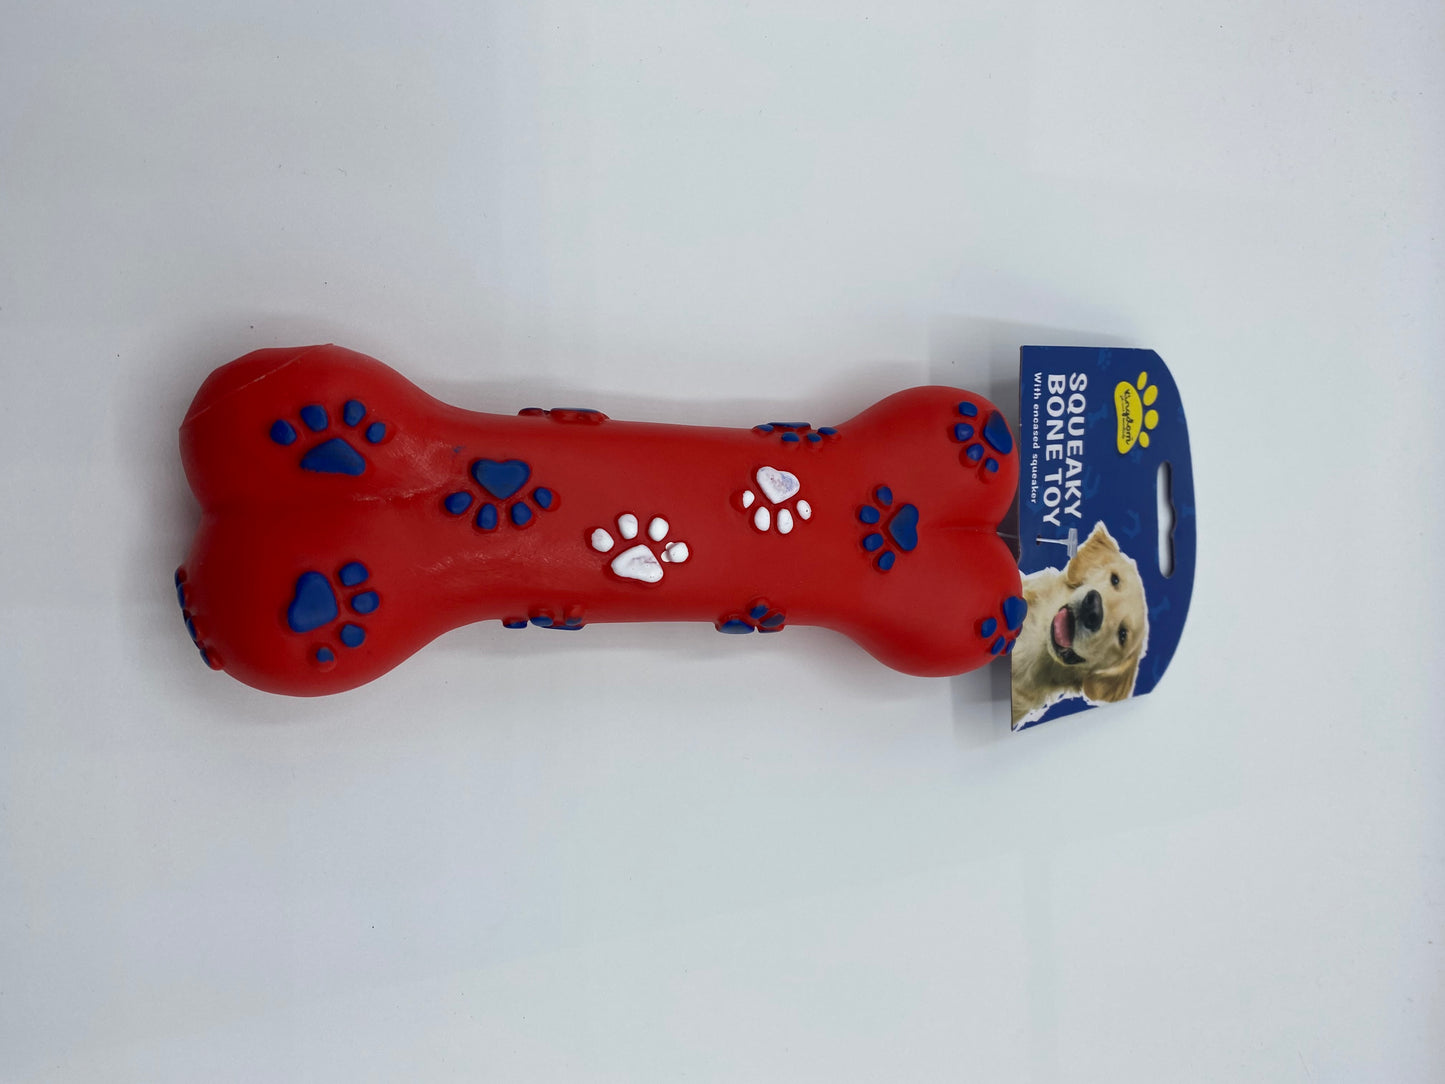 Vinyl Bone Shape Squeaky Dog Toy with Paw Print Size Approx 18cm Long in Four Colours